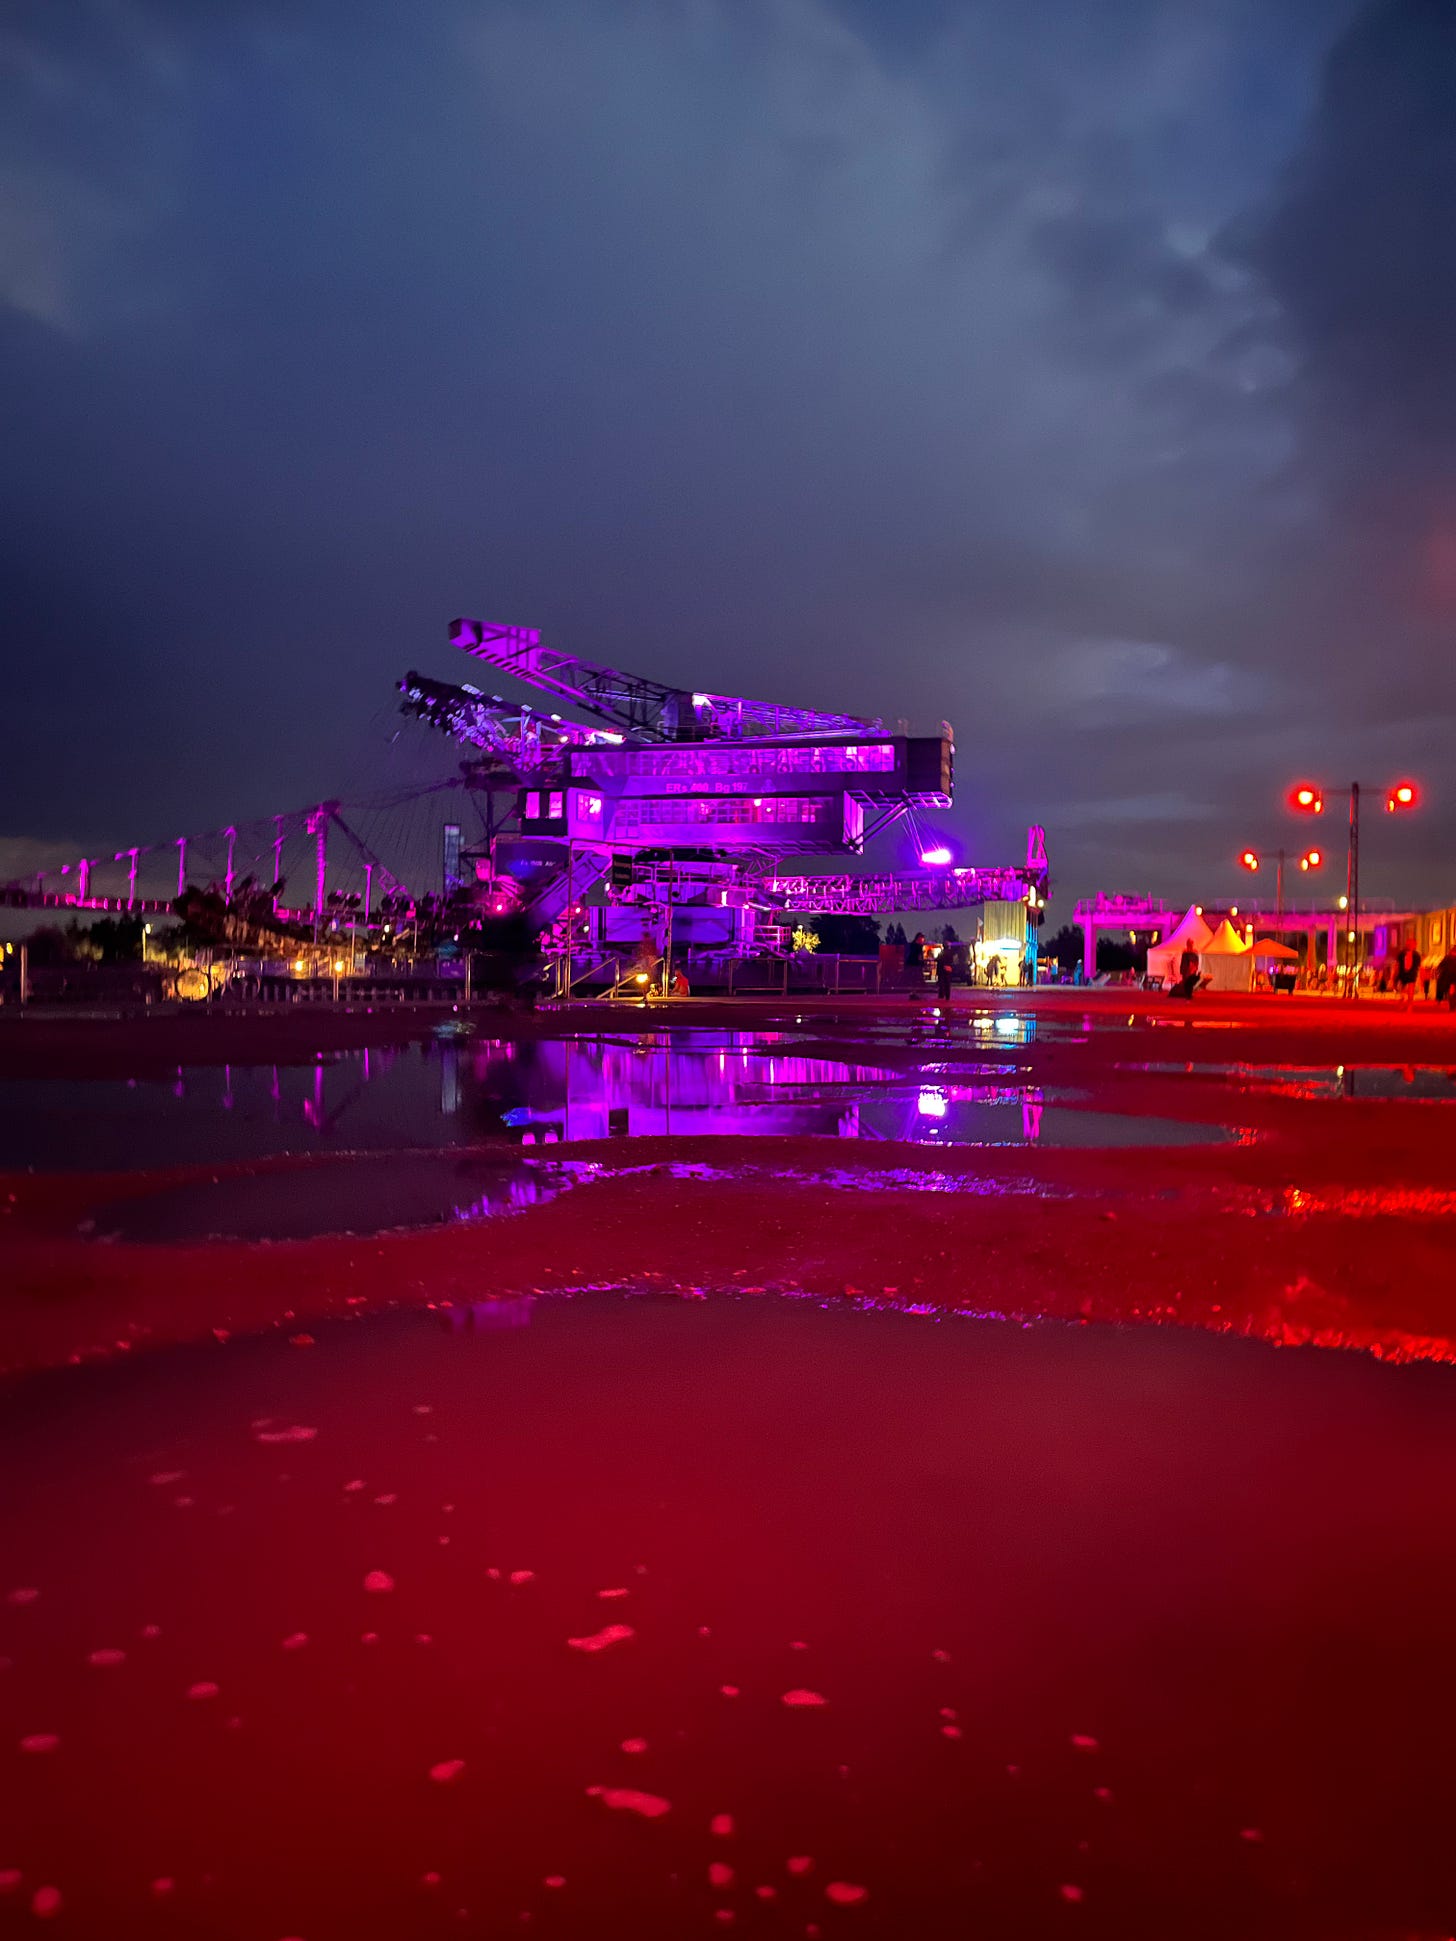 huge mining crane at night, lit up in purple. the light is reflected in the puddles on the ground at whole festival.